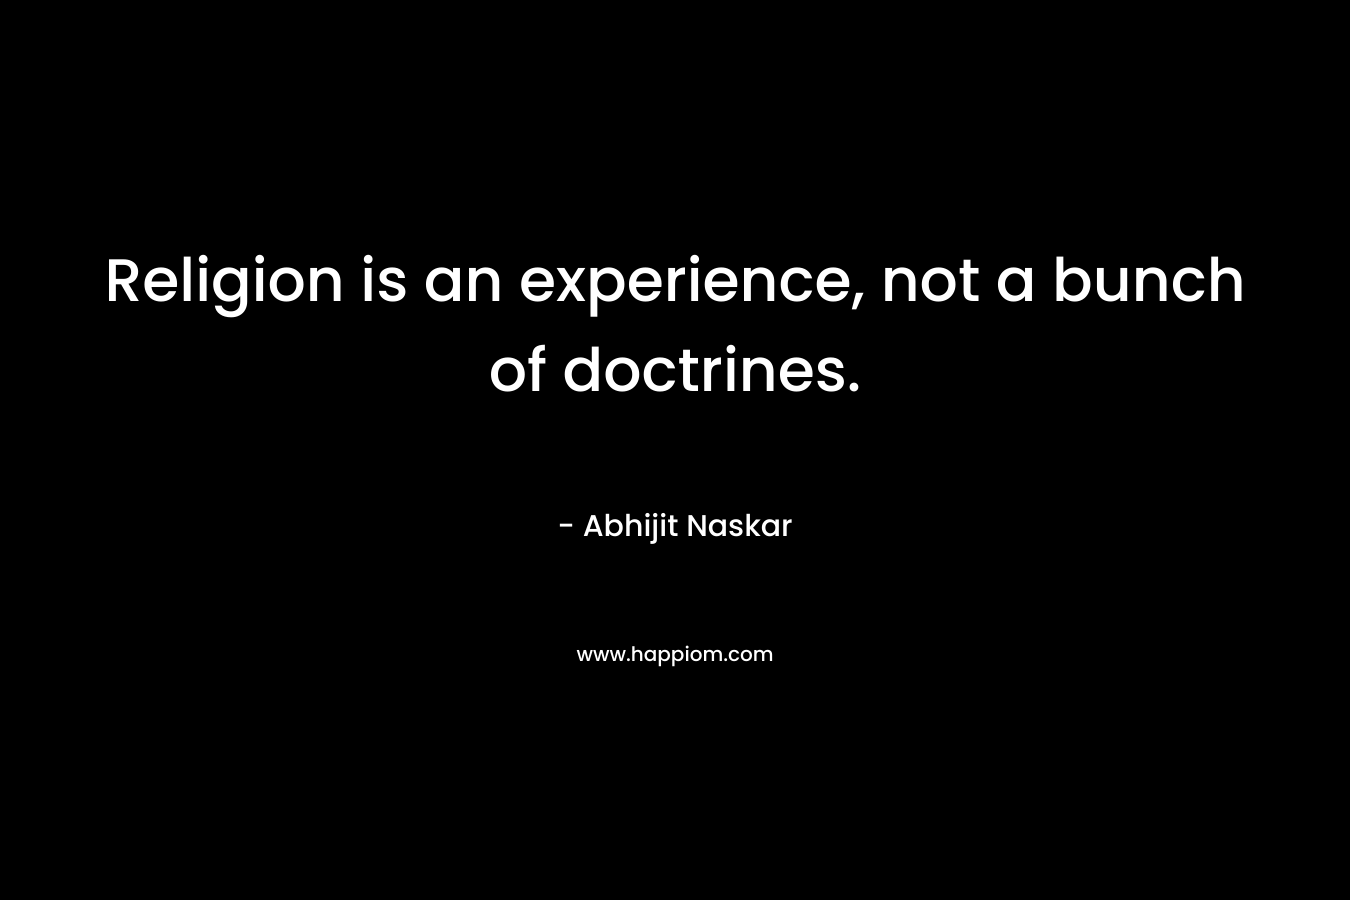 Religion is an experience, not a bunch of doctrines.